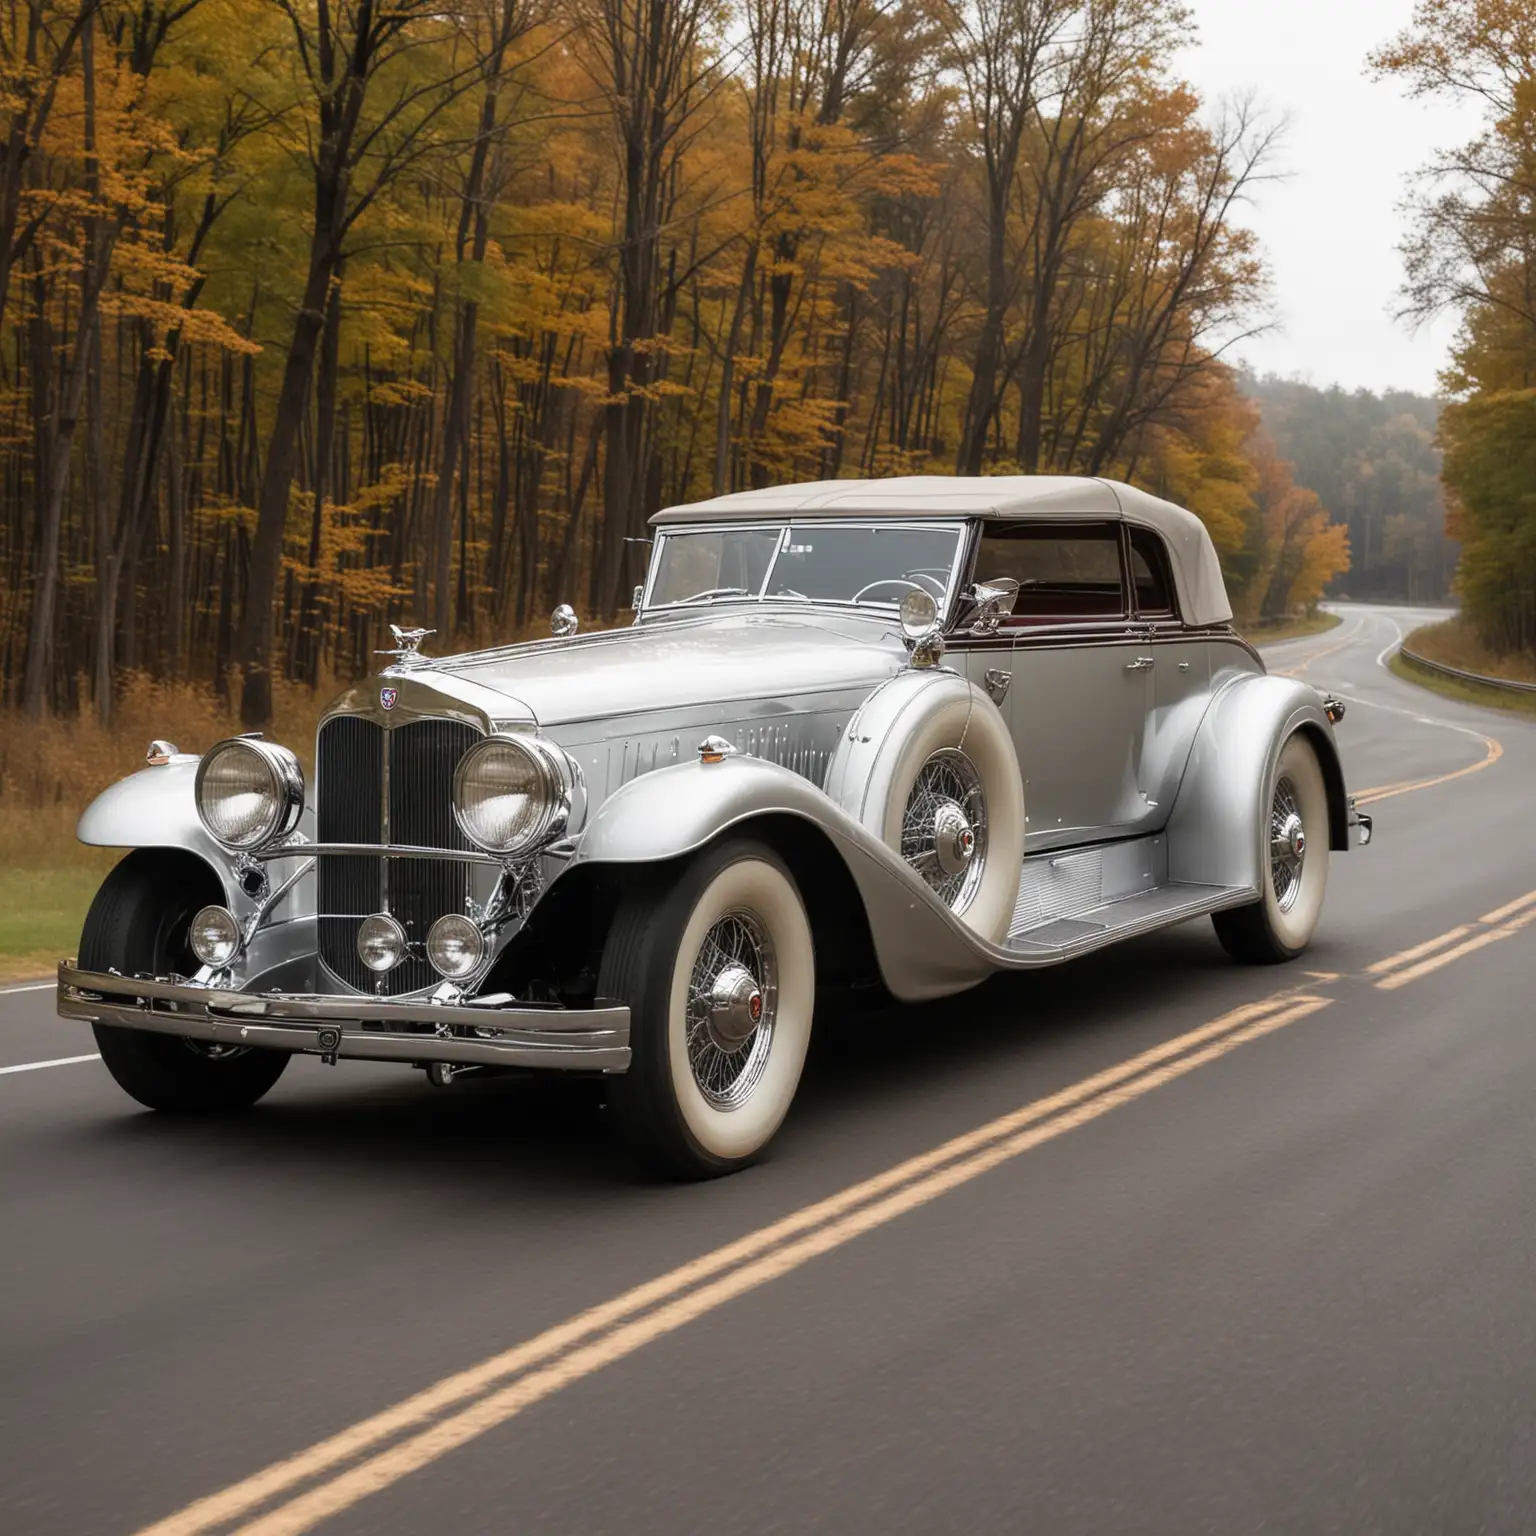 Vintage Duesenberg Car Driving on Country Road